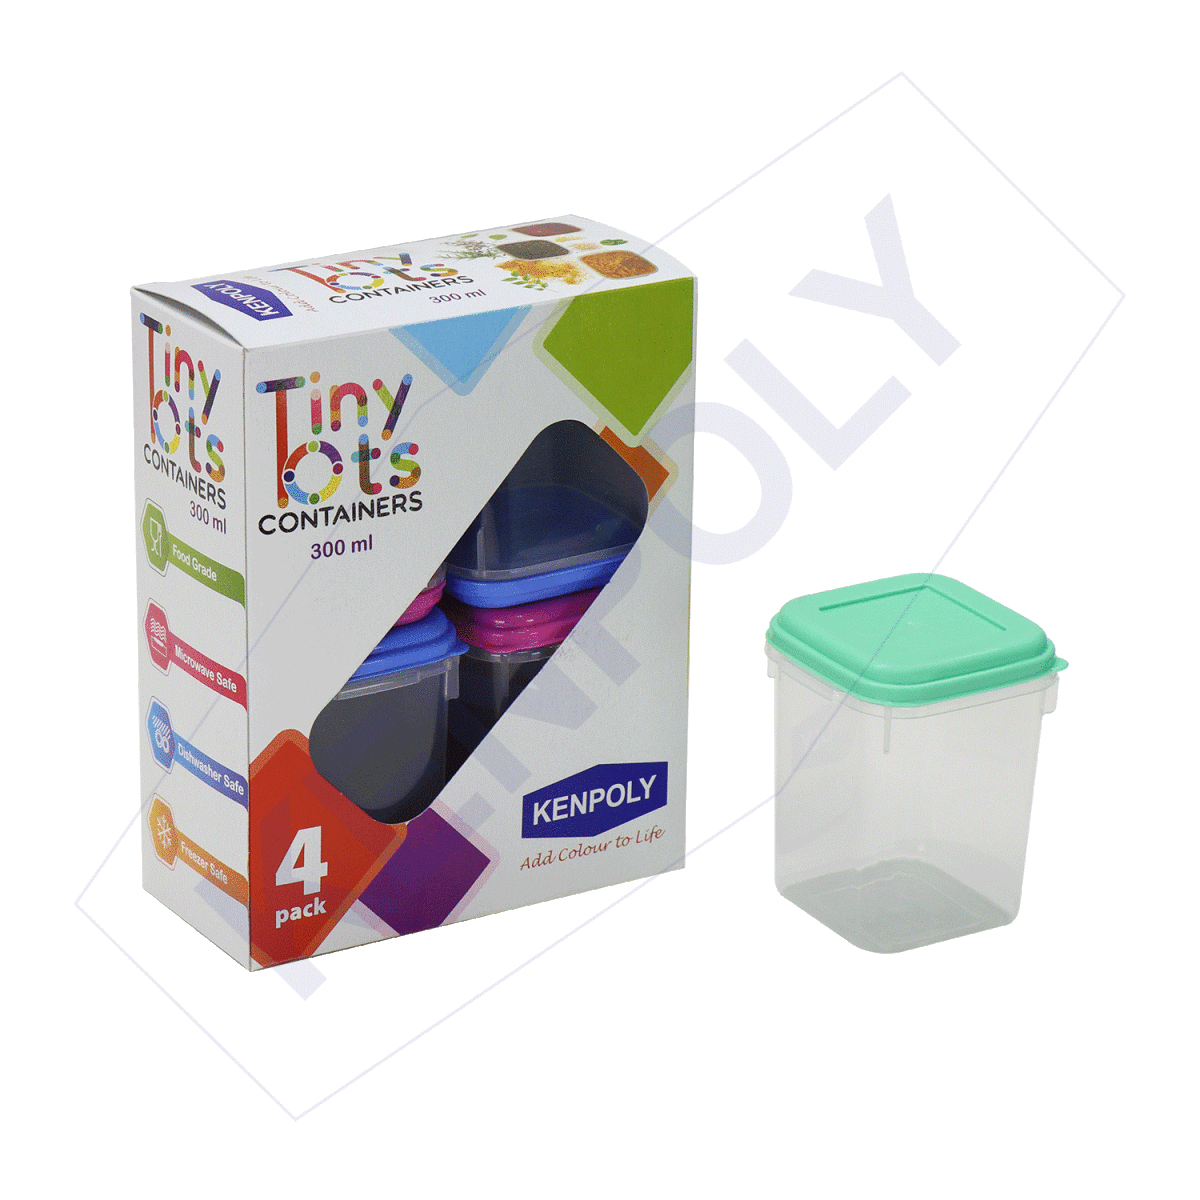 Tiny Tots Containers 300 ml